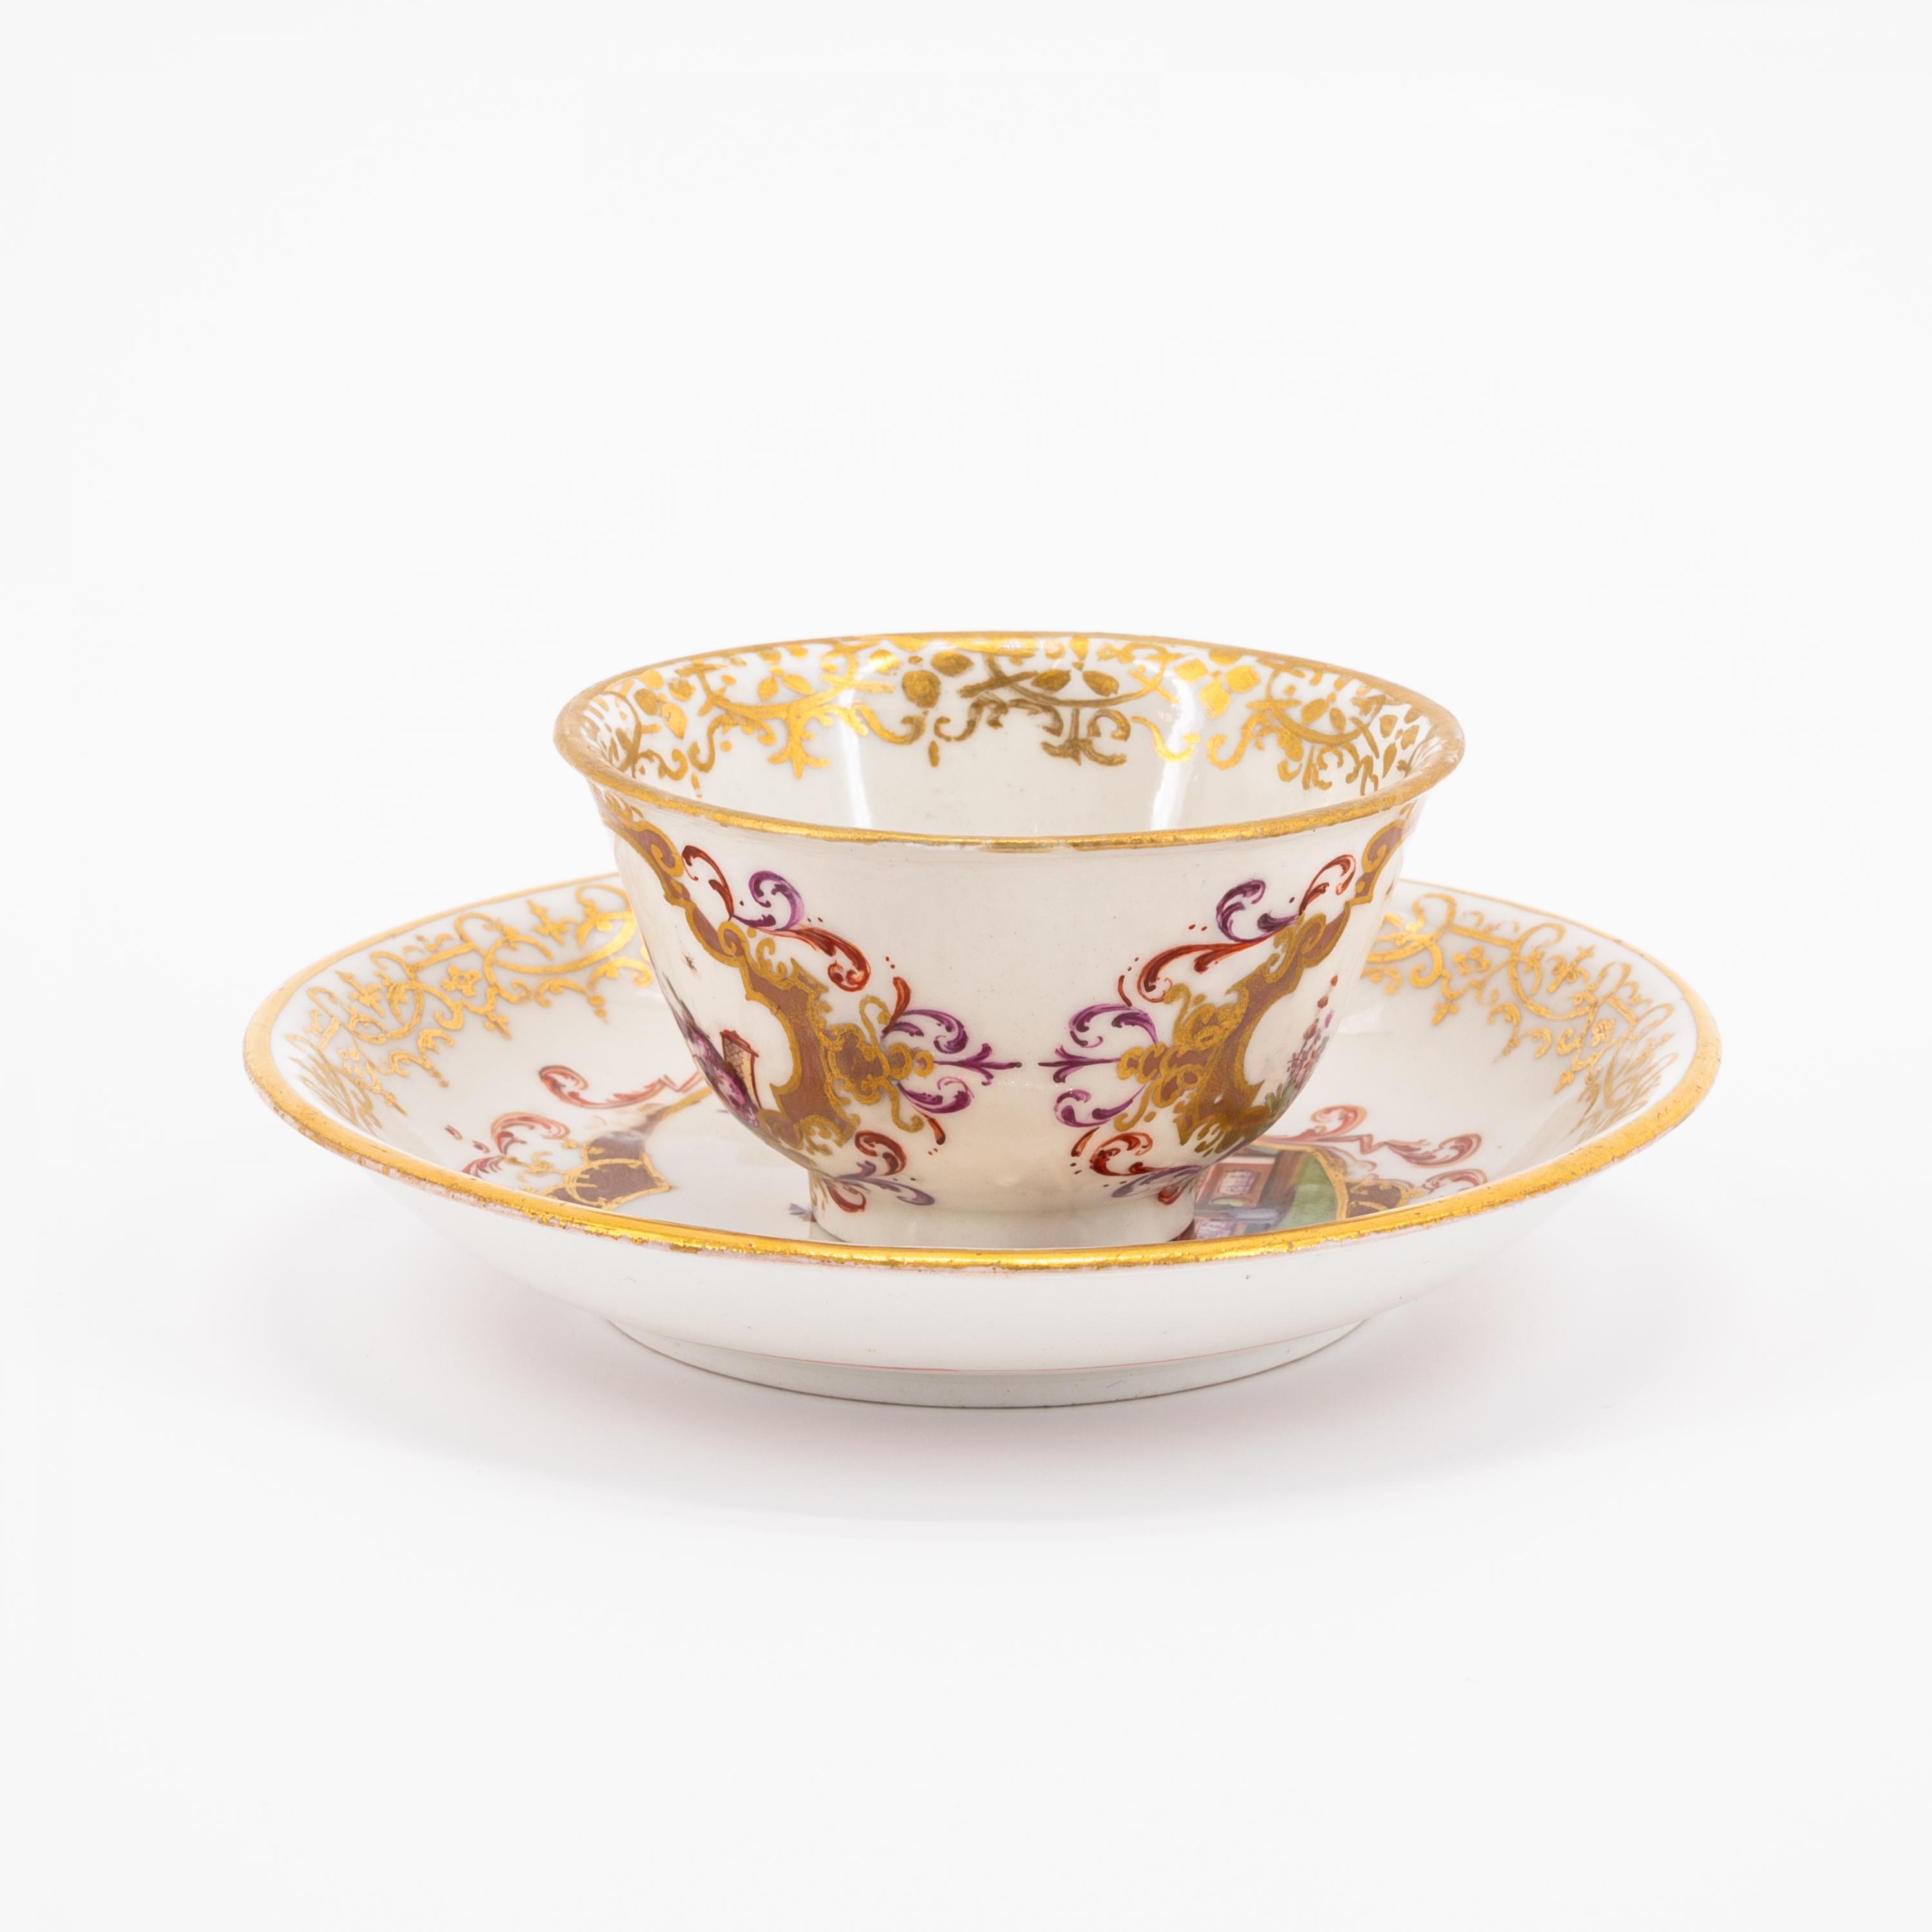 TWO PORCELAIN TEA BOWLS WITH SAUERES AND CHINOISERIES - Image 4 of 11